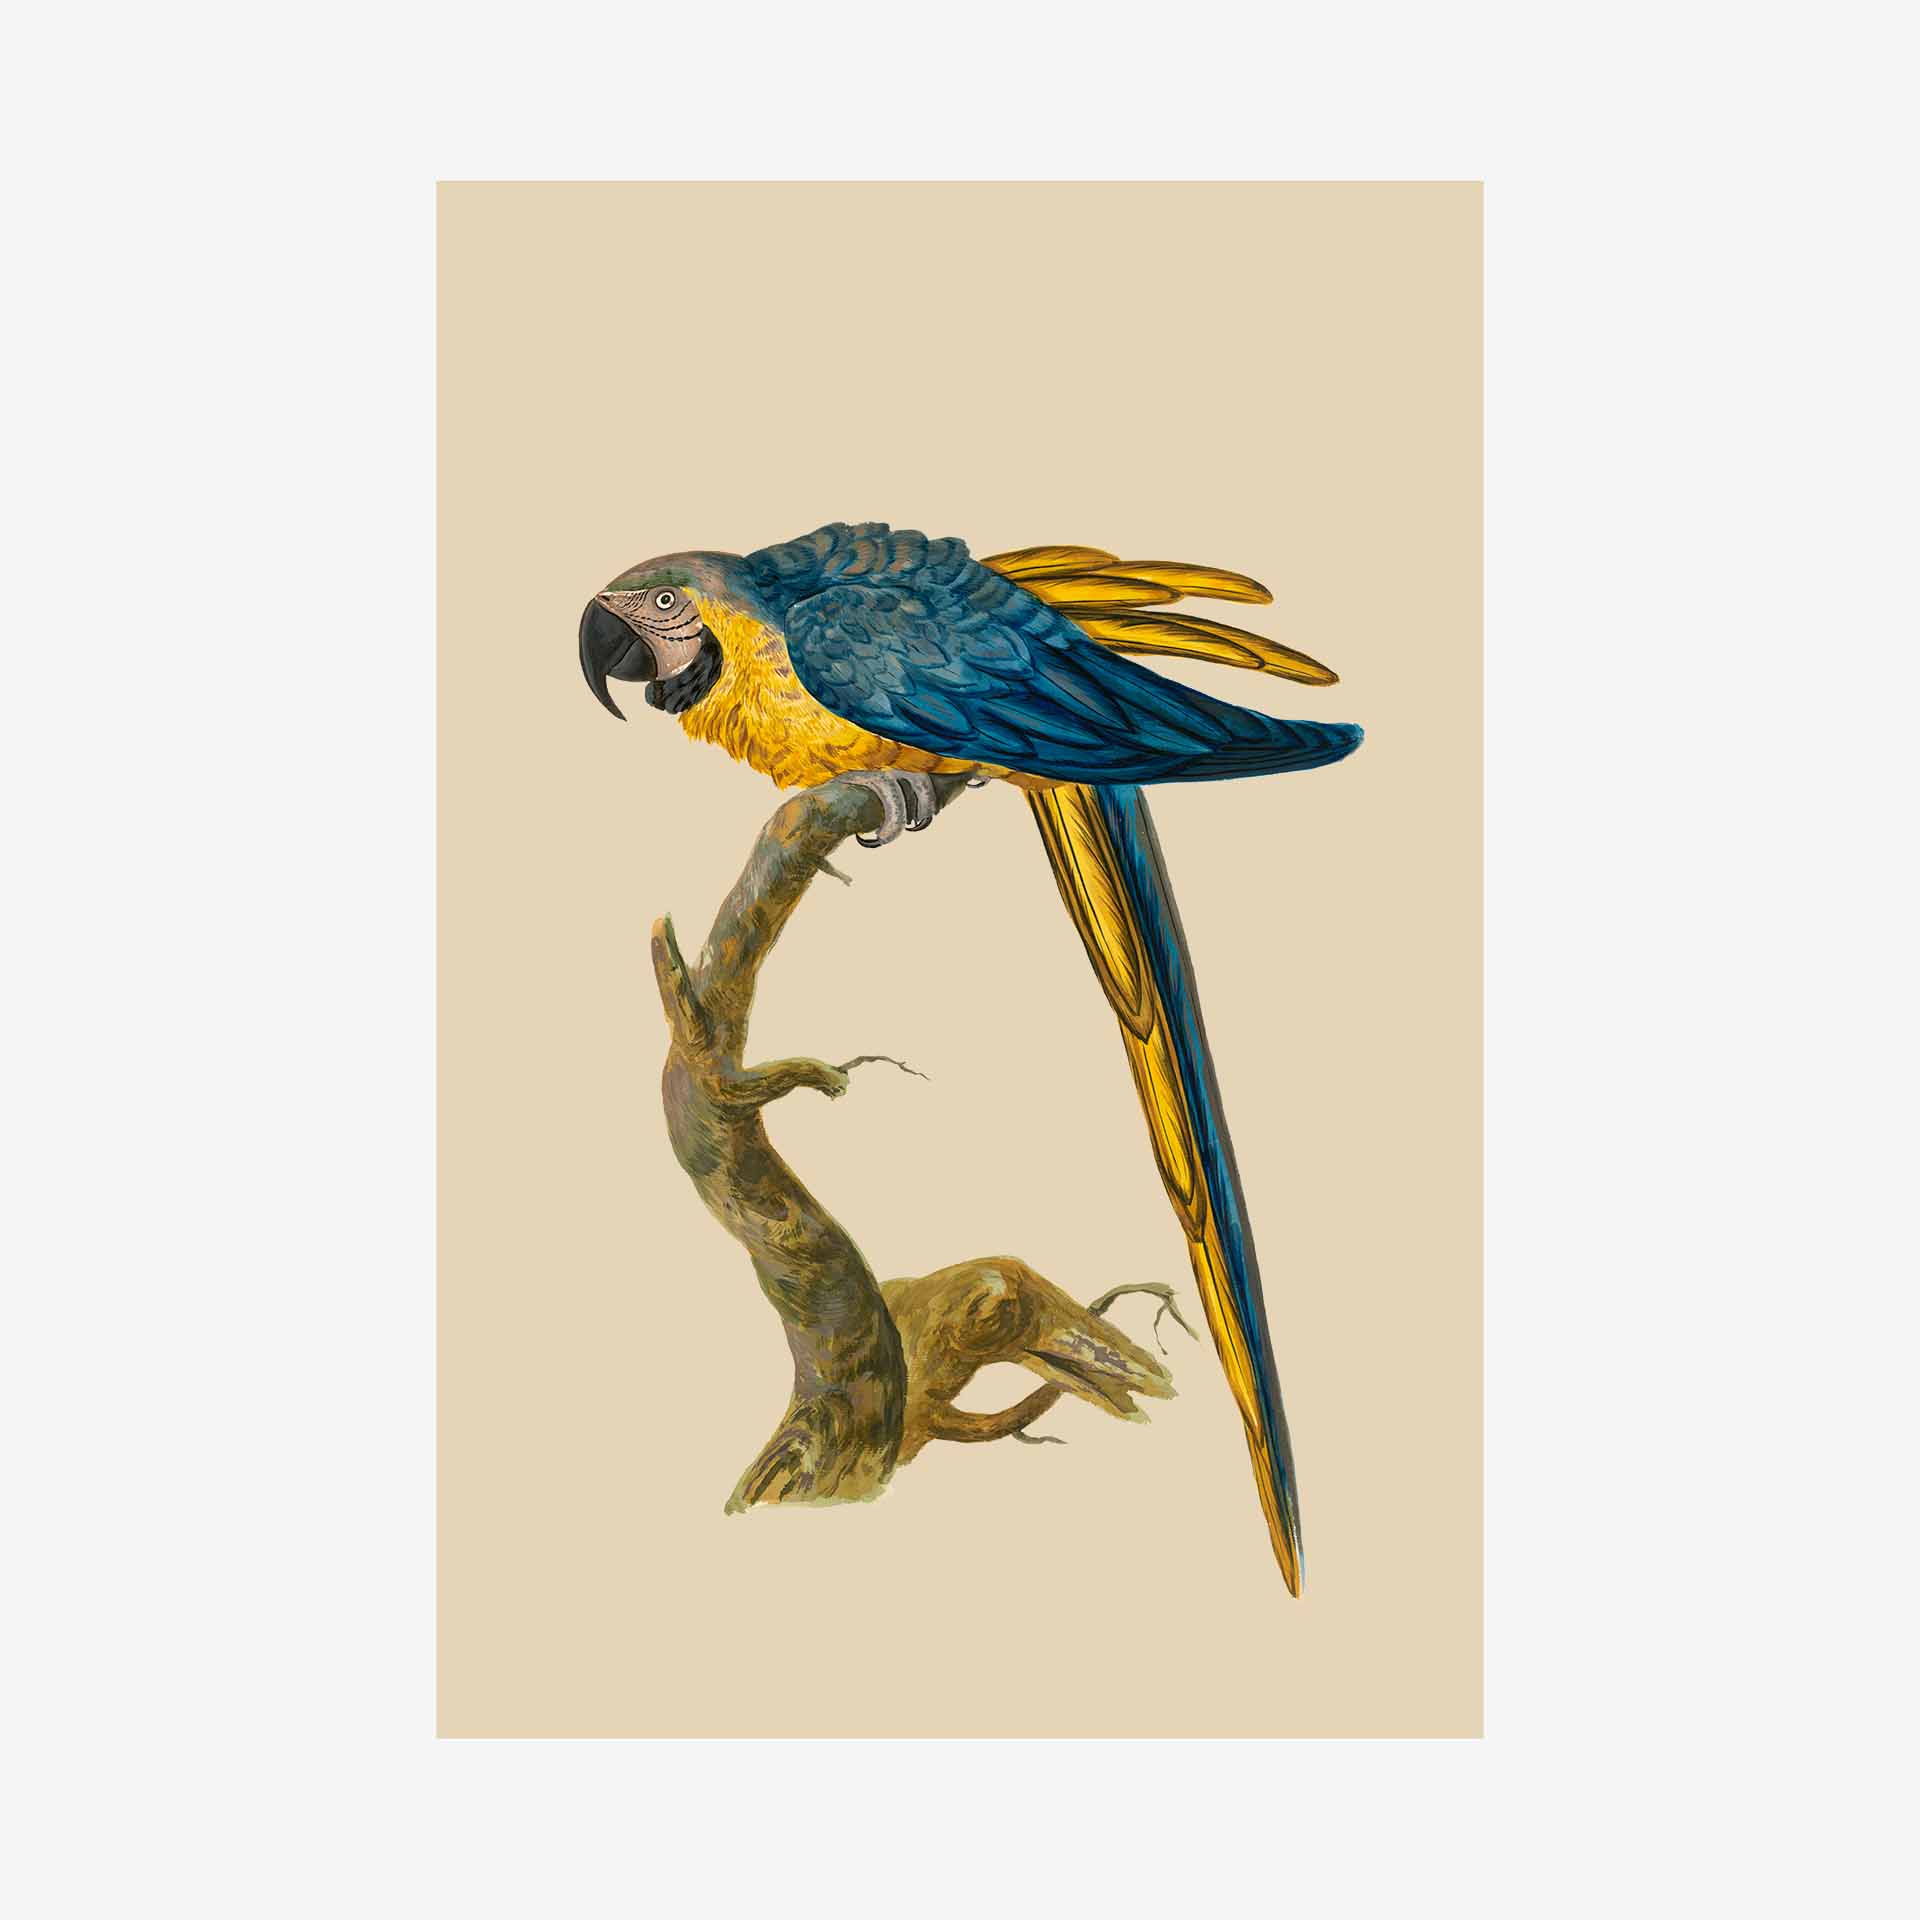 Featured image for “Blue & Yellow Macaw Greetings Card”